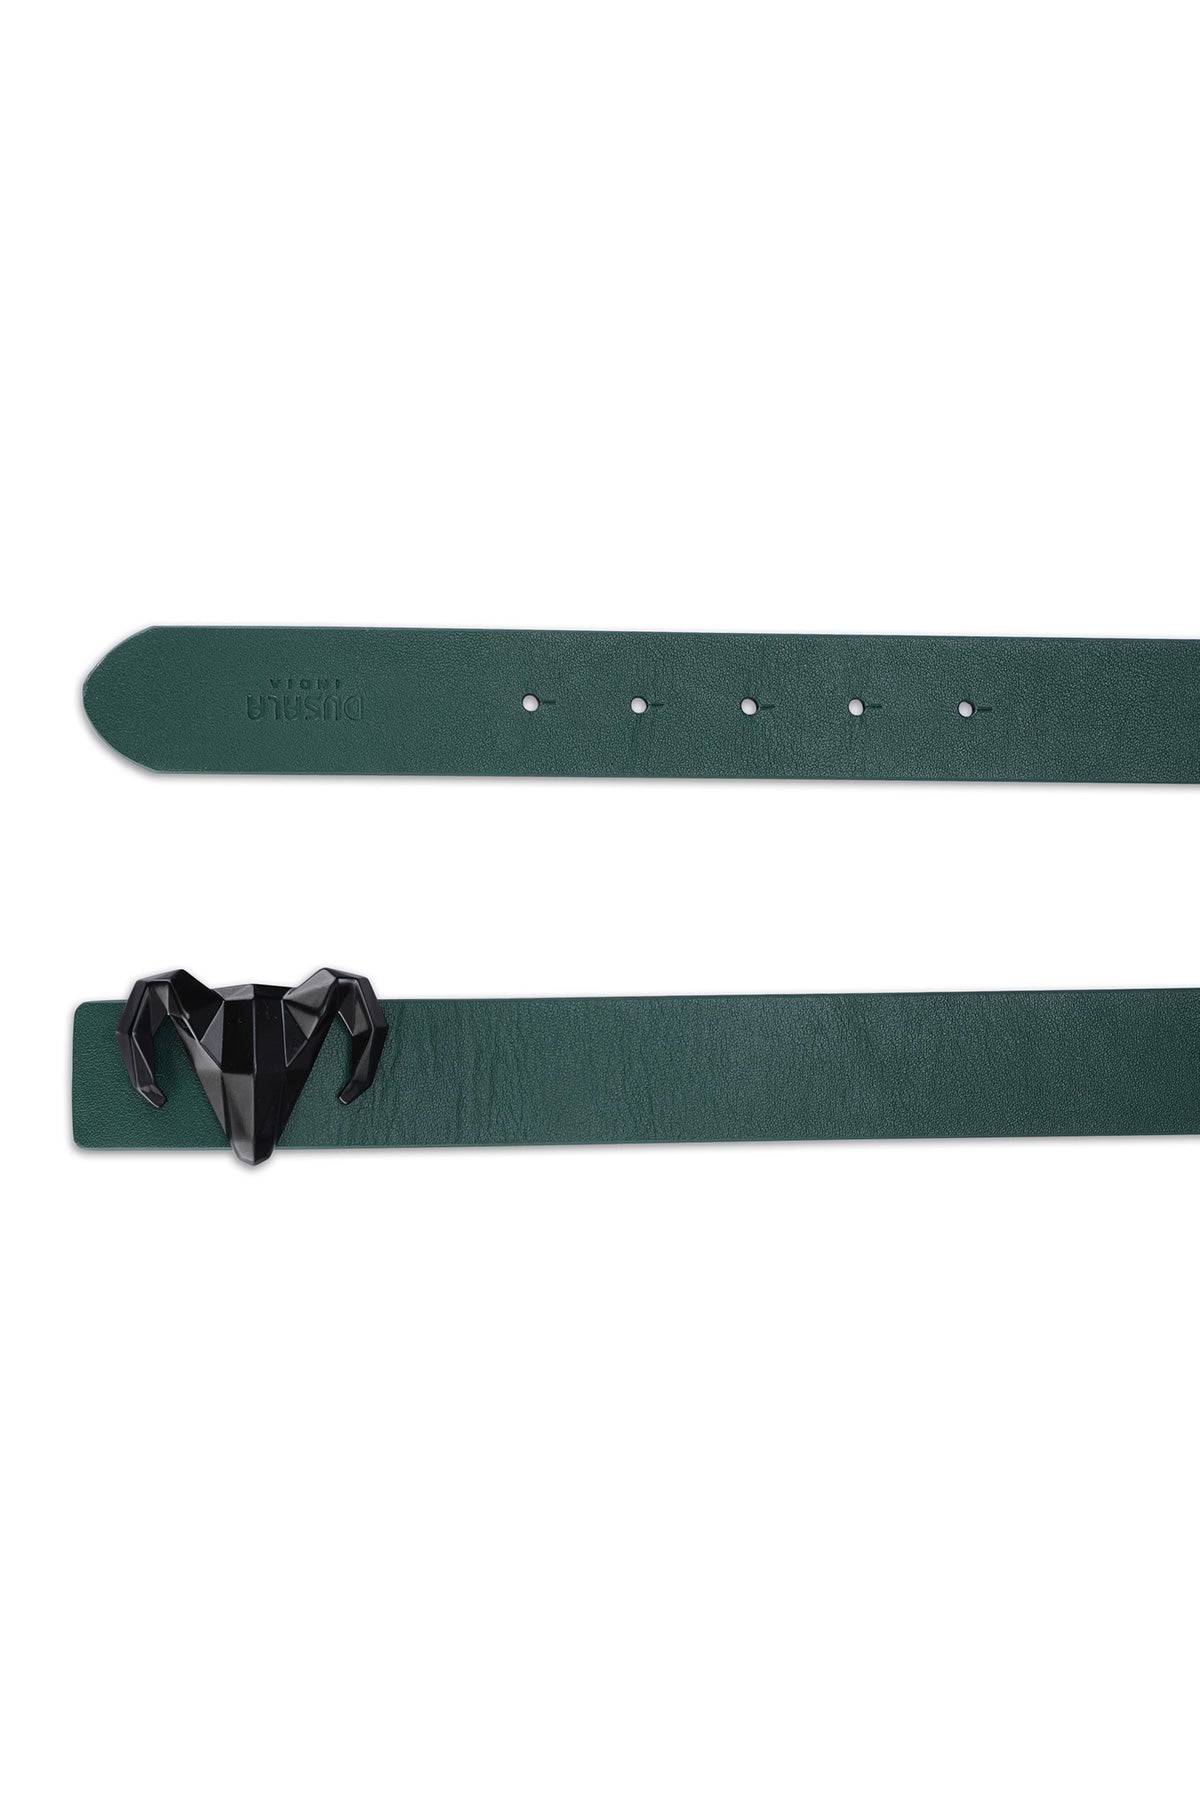 Italian Leather Ram Buckle Reversible Belt – Green and Brown